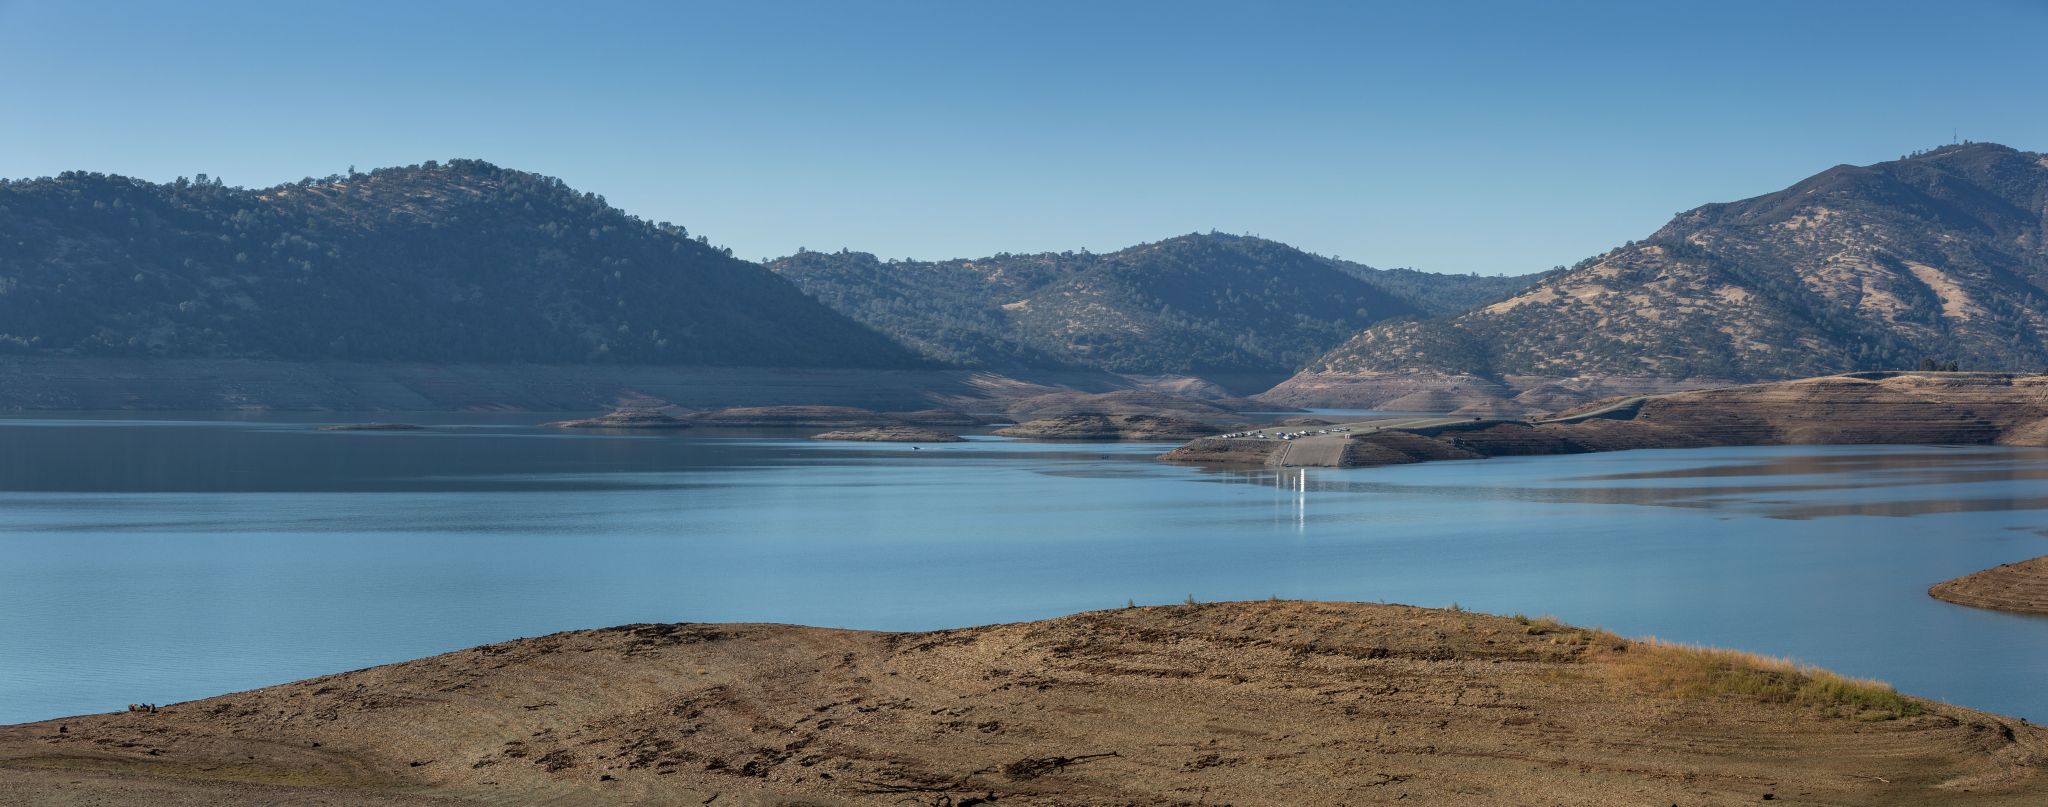 January 2022 on track to be driest January on record in parts of California - SFGate